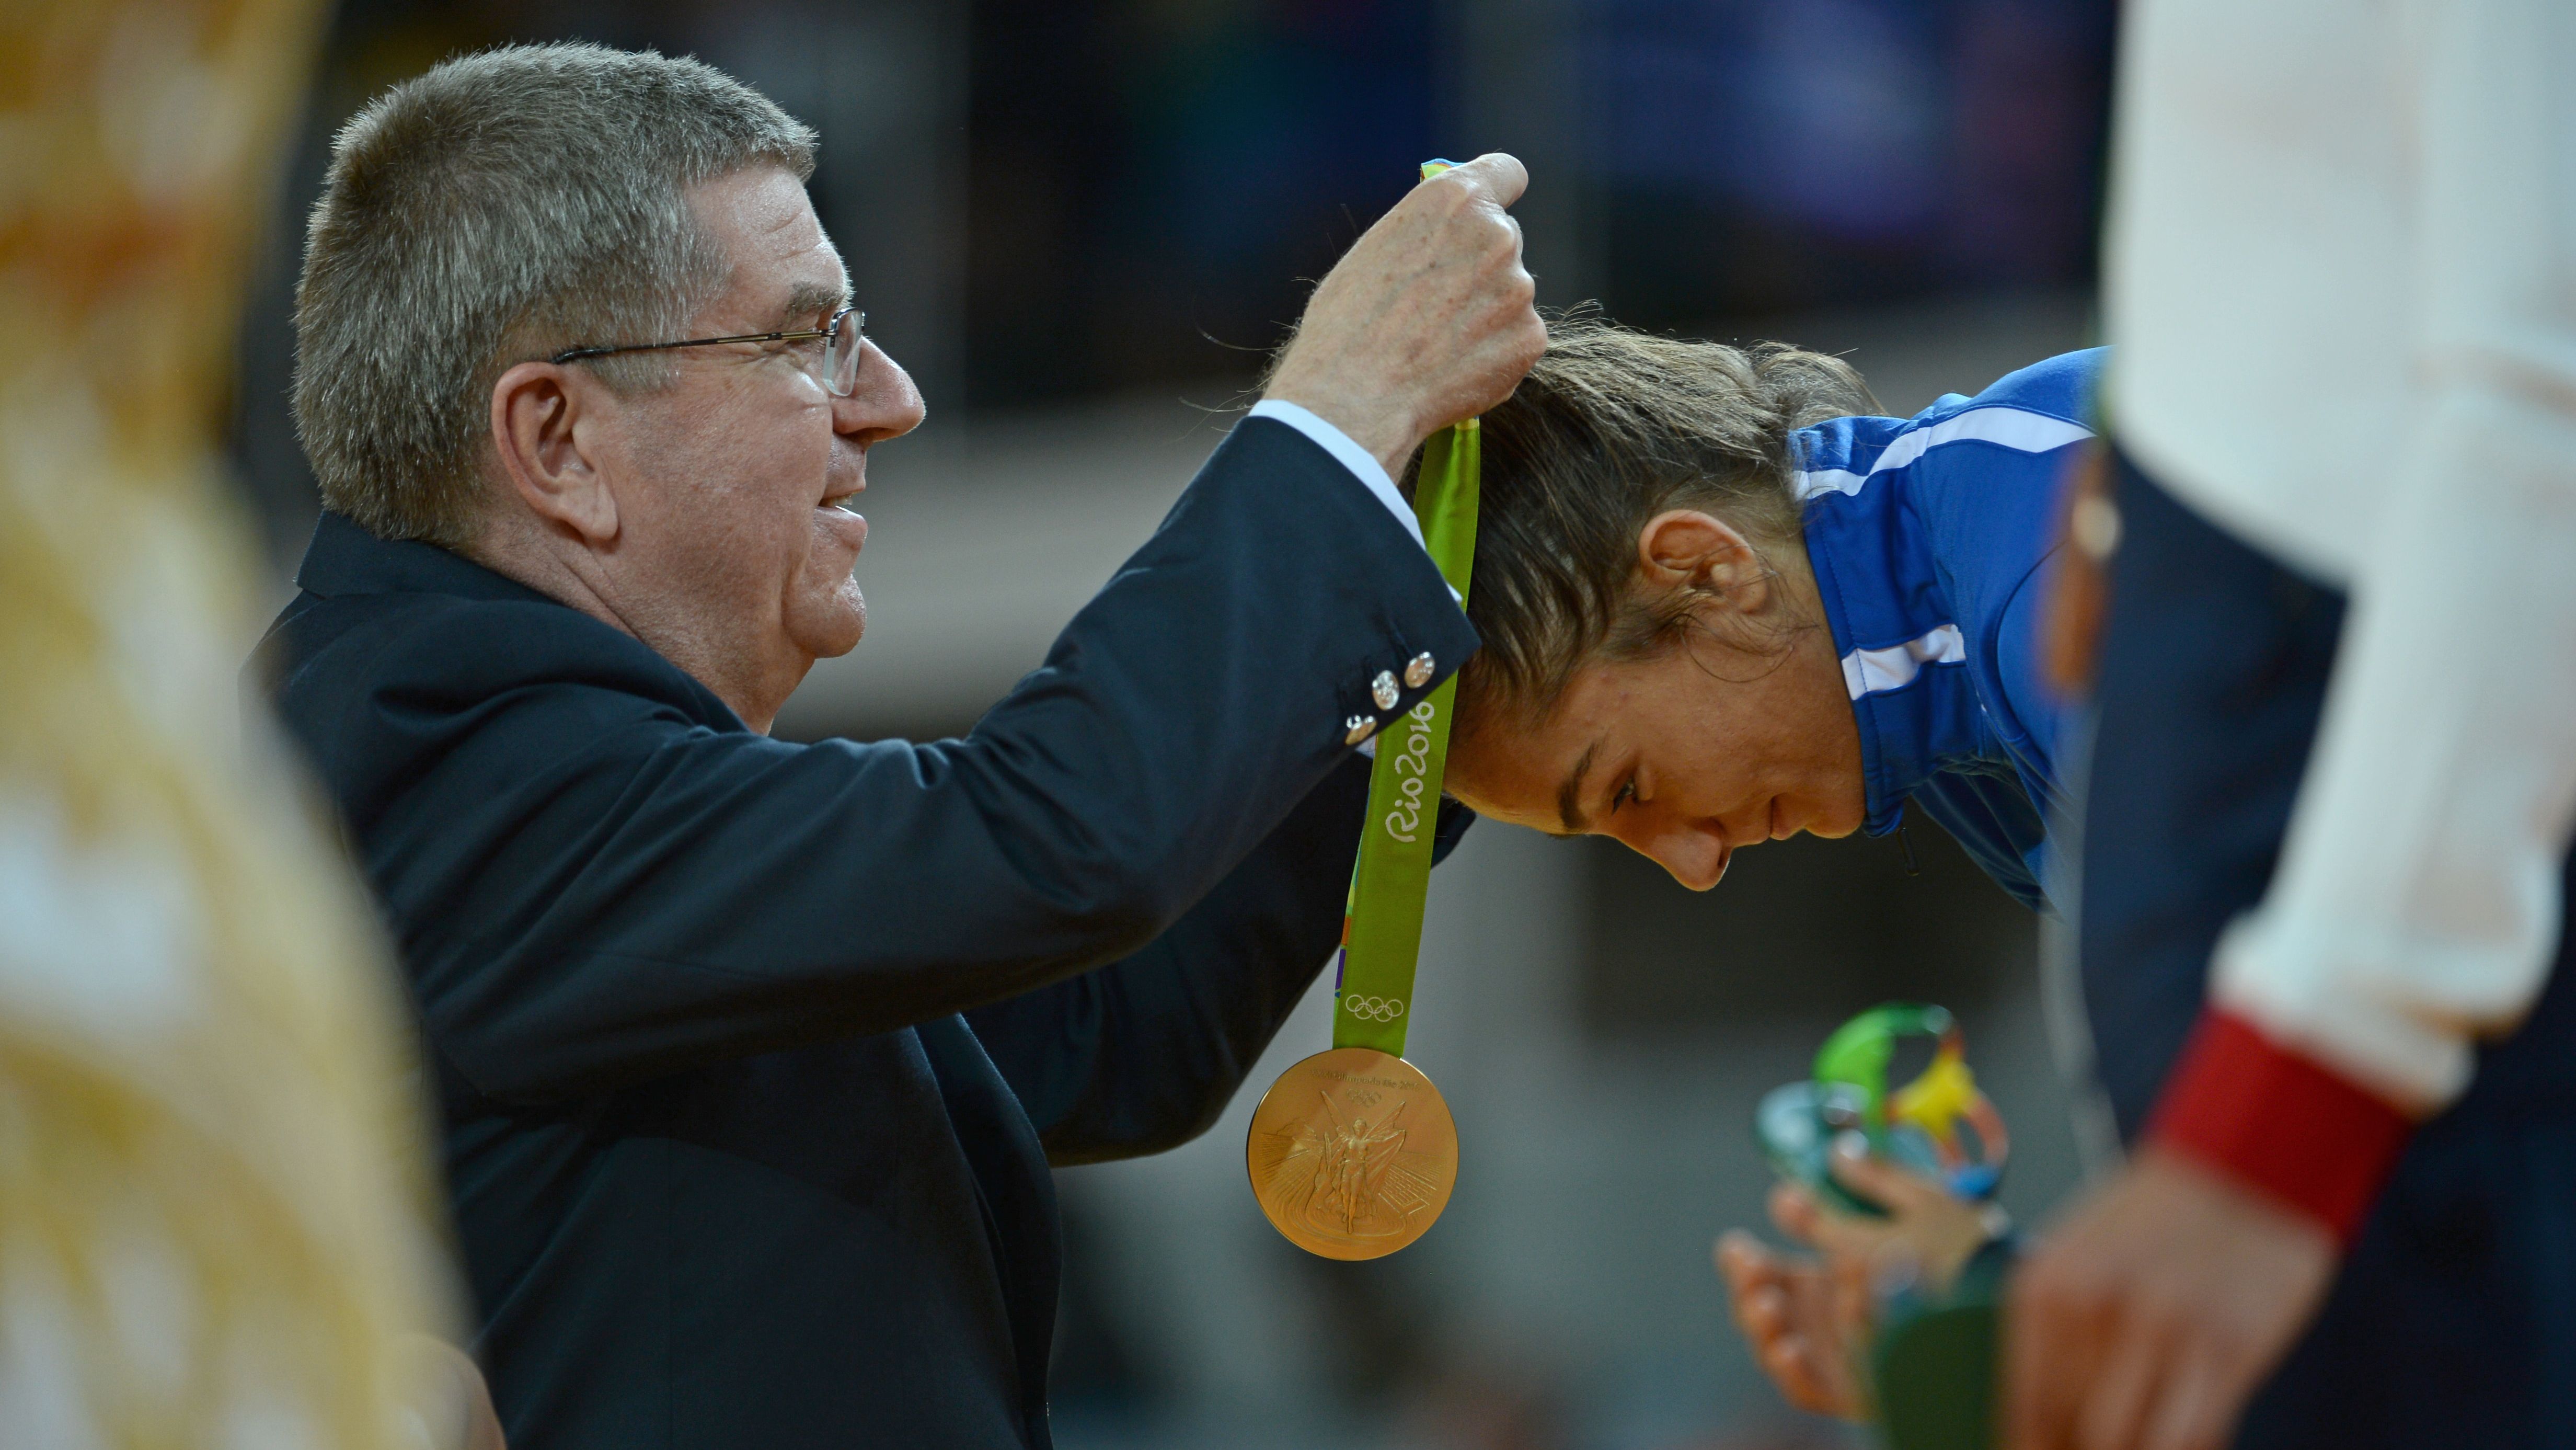 The precise moment Kelmendi was awarded Kosovo's first ever Olympic medal.